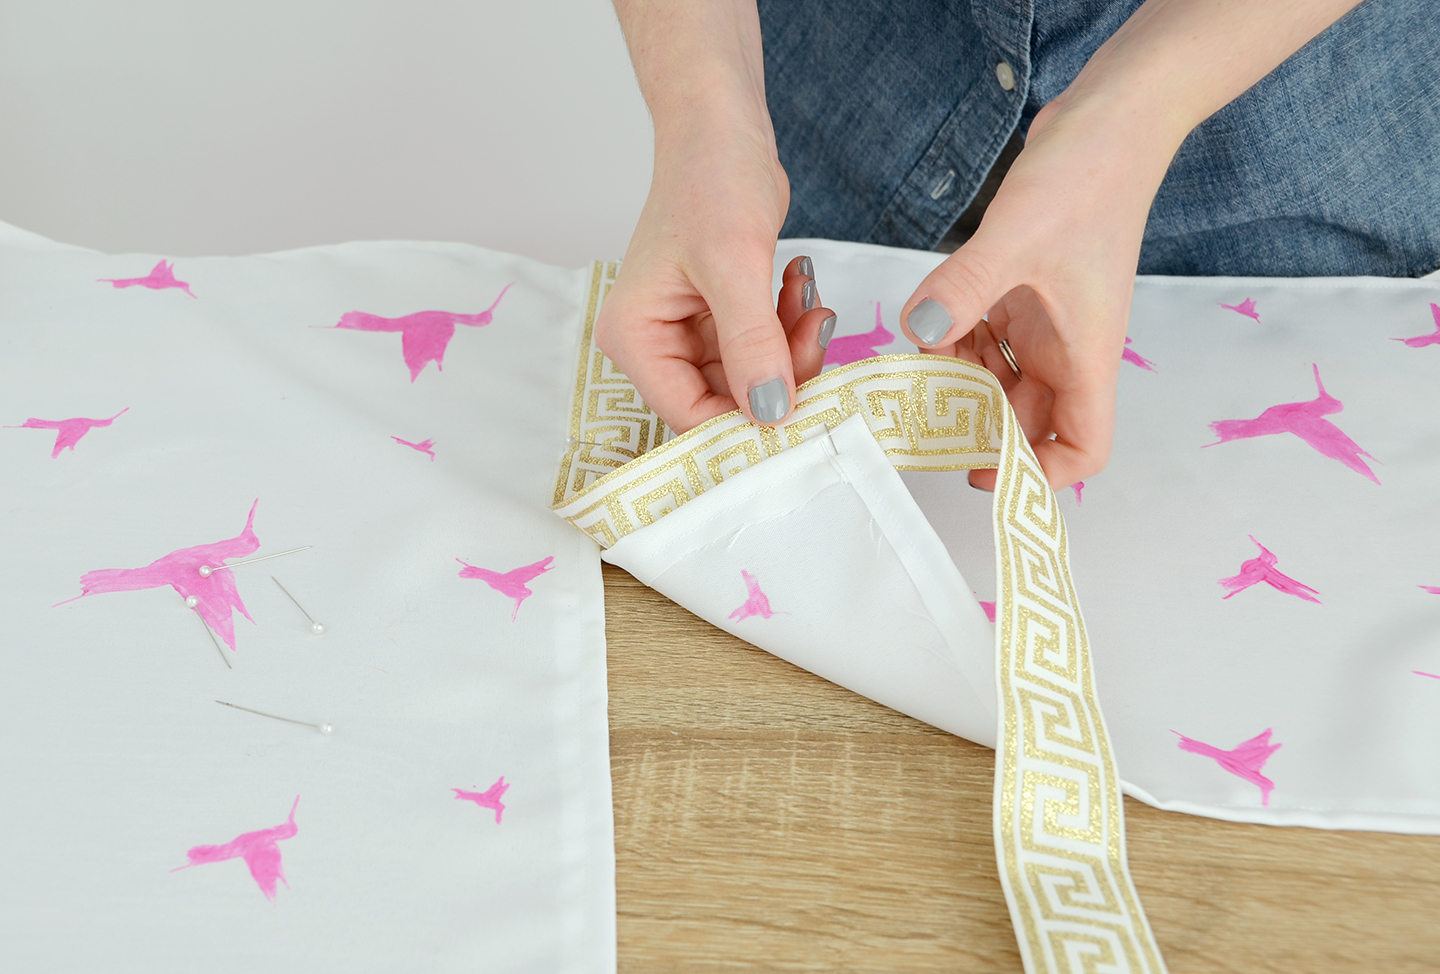 DIY Hummingbird Printed Apron Using Rubber Stamps /// By Design Fixation